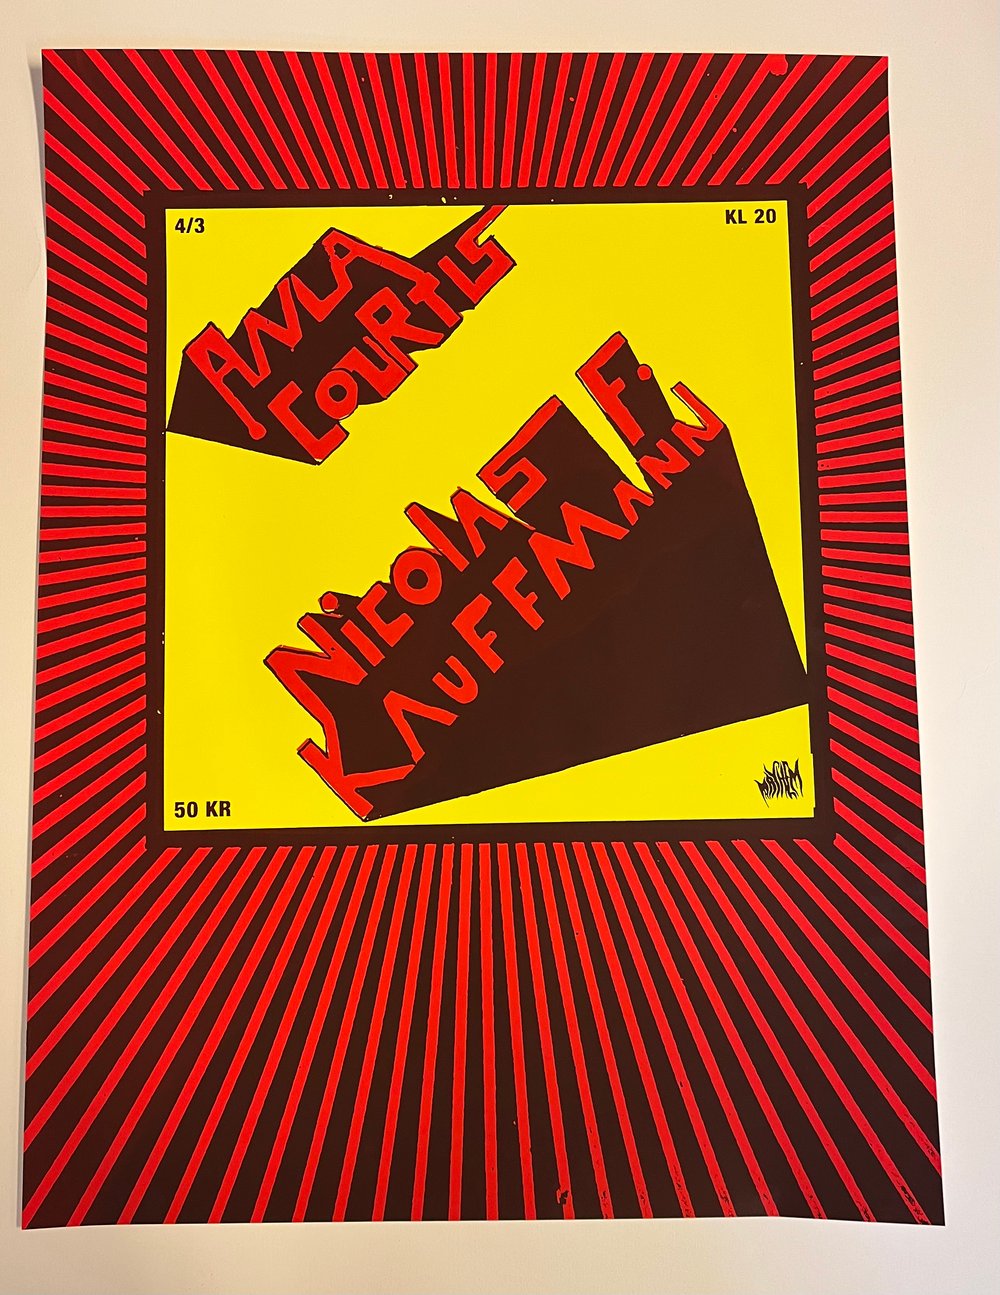 Image of Anla Courtis gig poster 